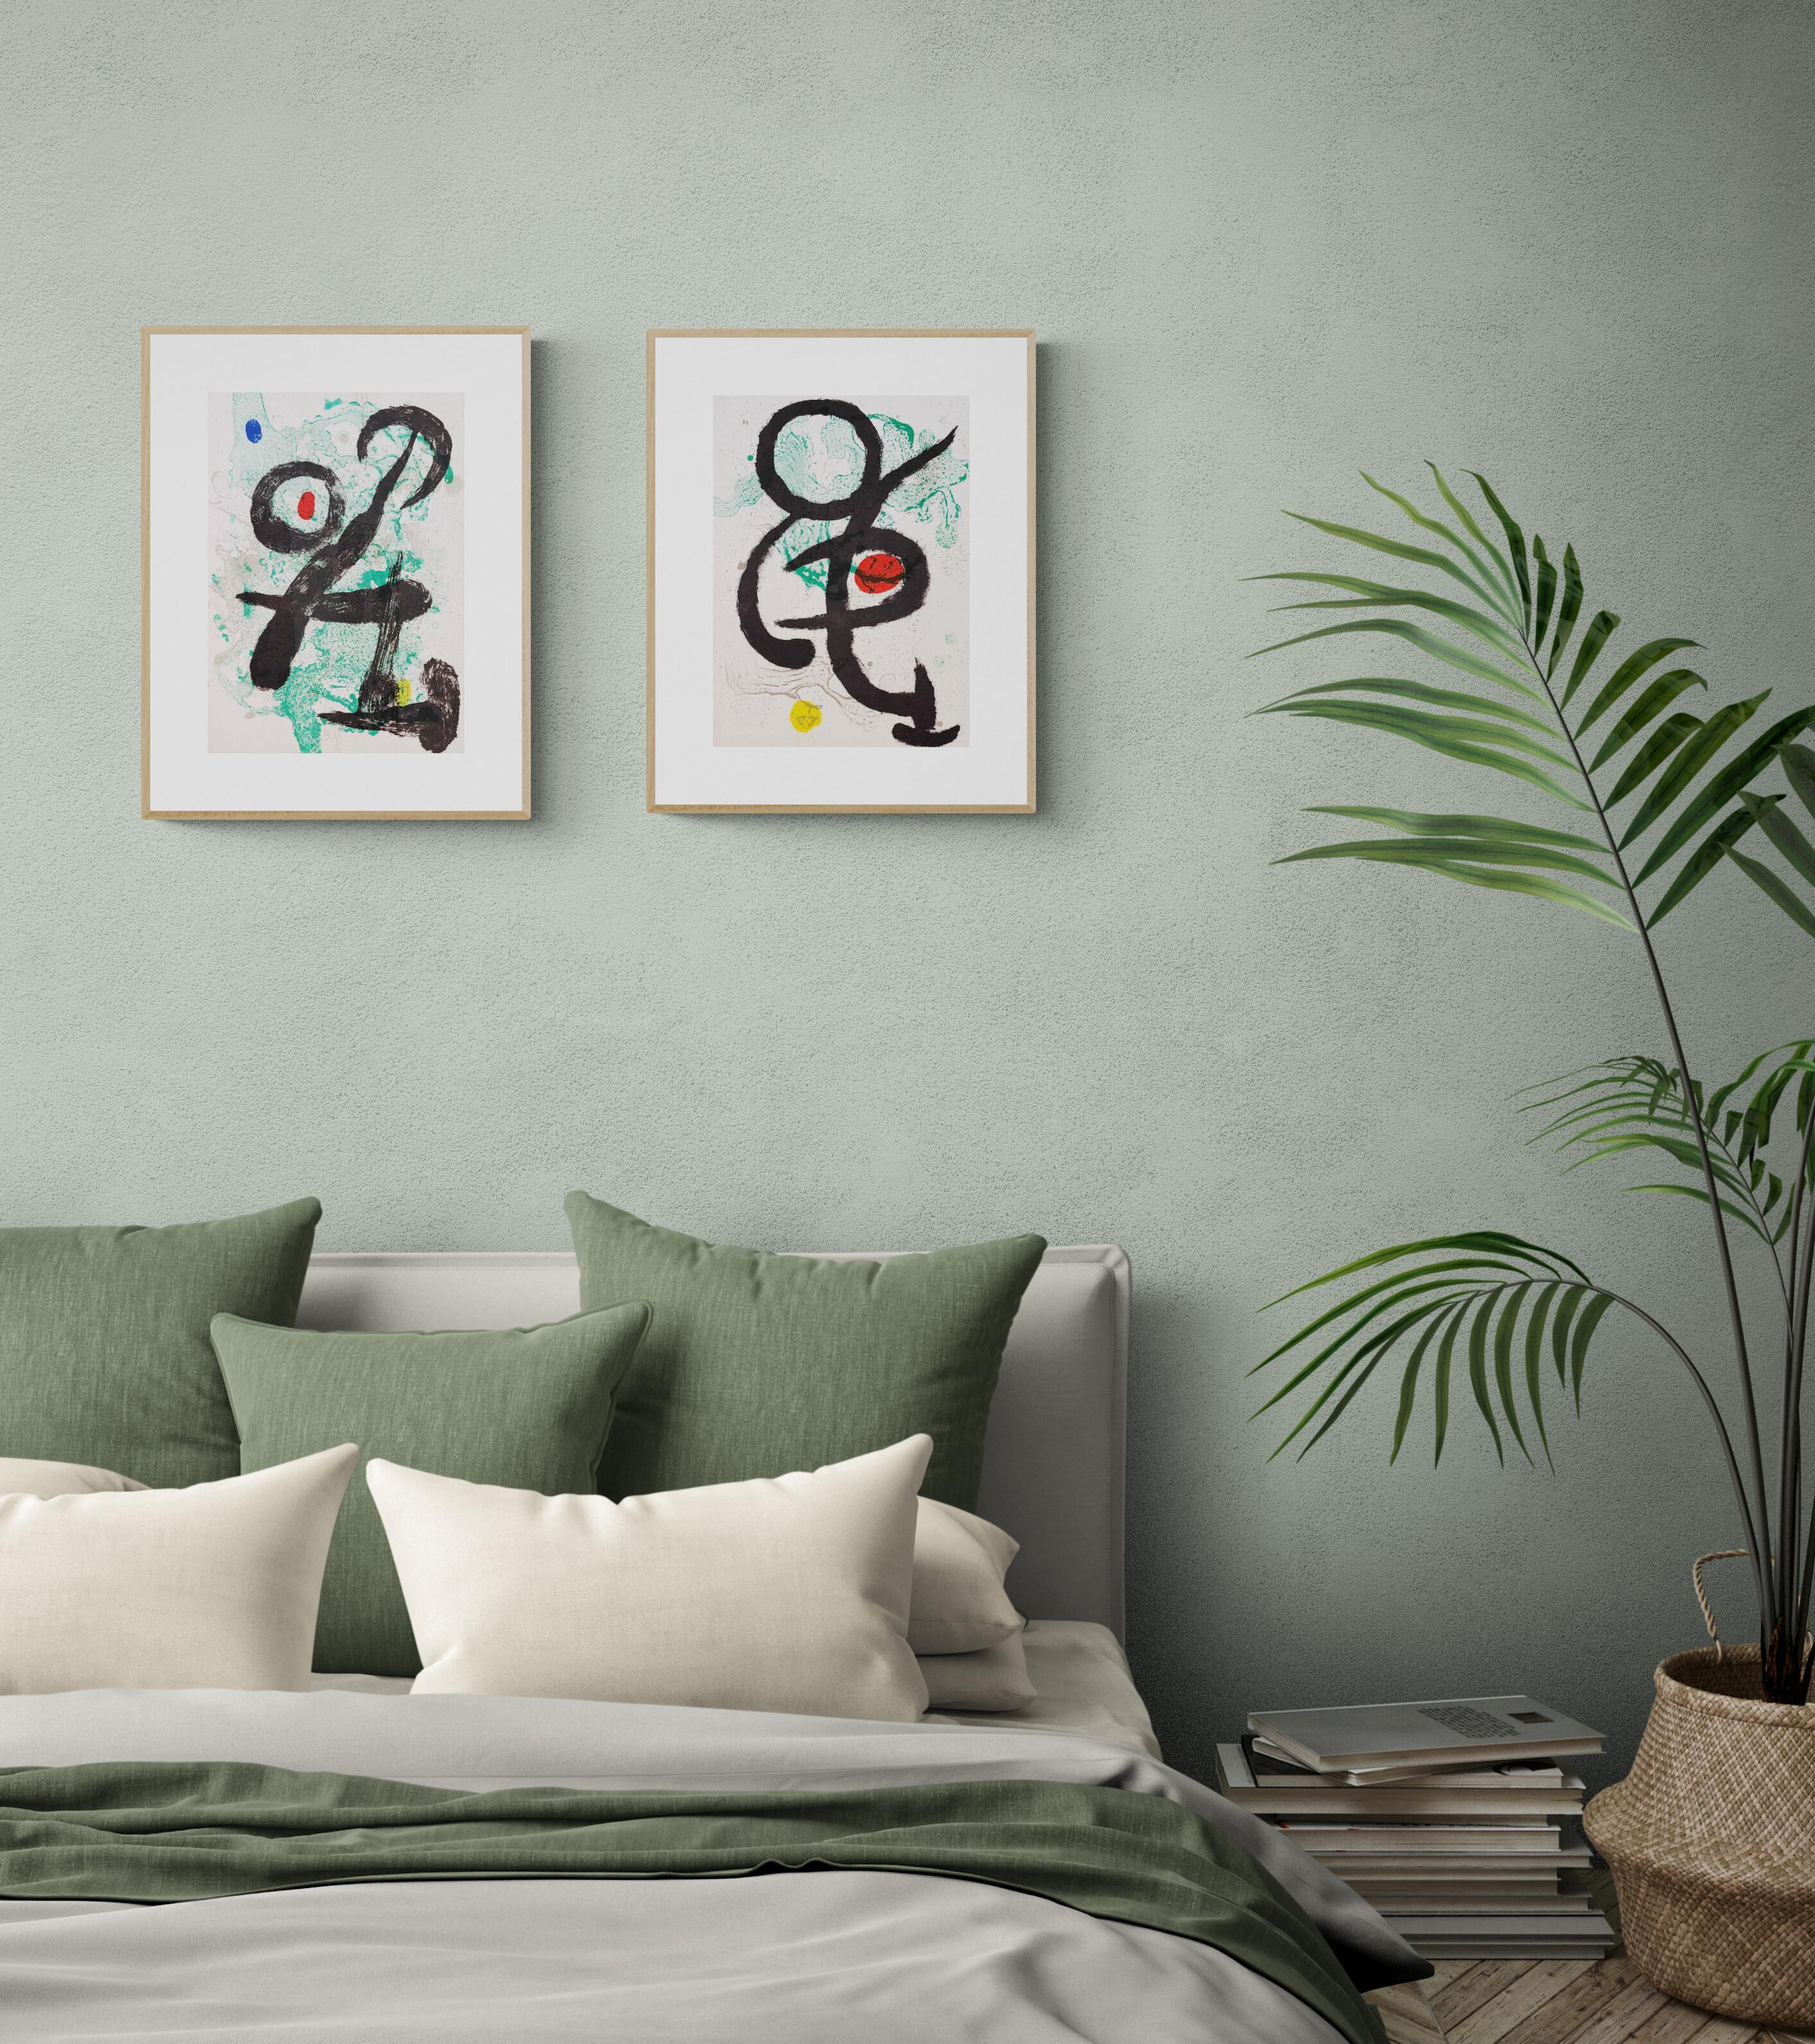 Le Faune (from Artigas) (Abstract Expressionism, Surrealism, Ceramics, Green) - Surrealist Print by Joan Miró